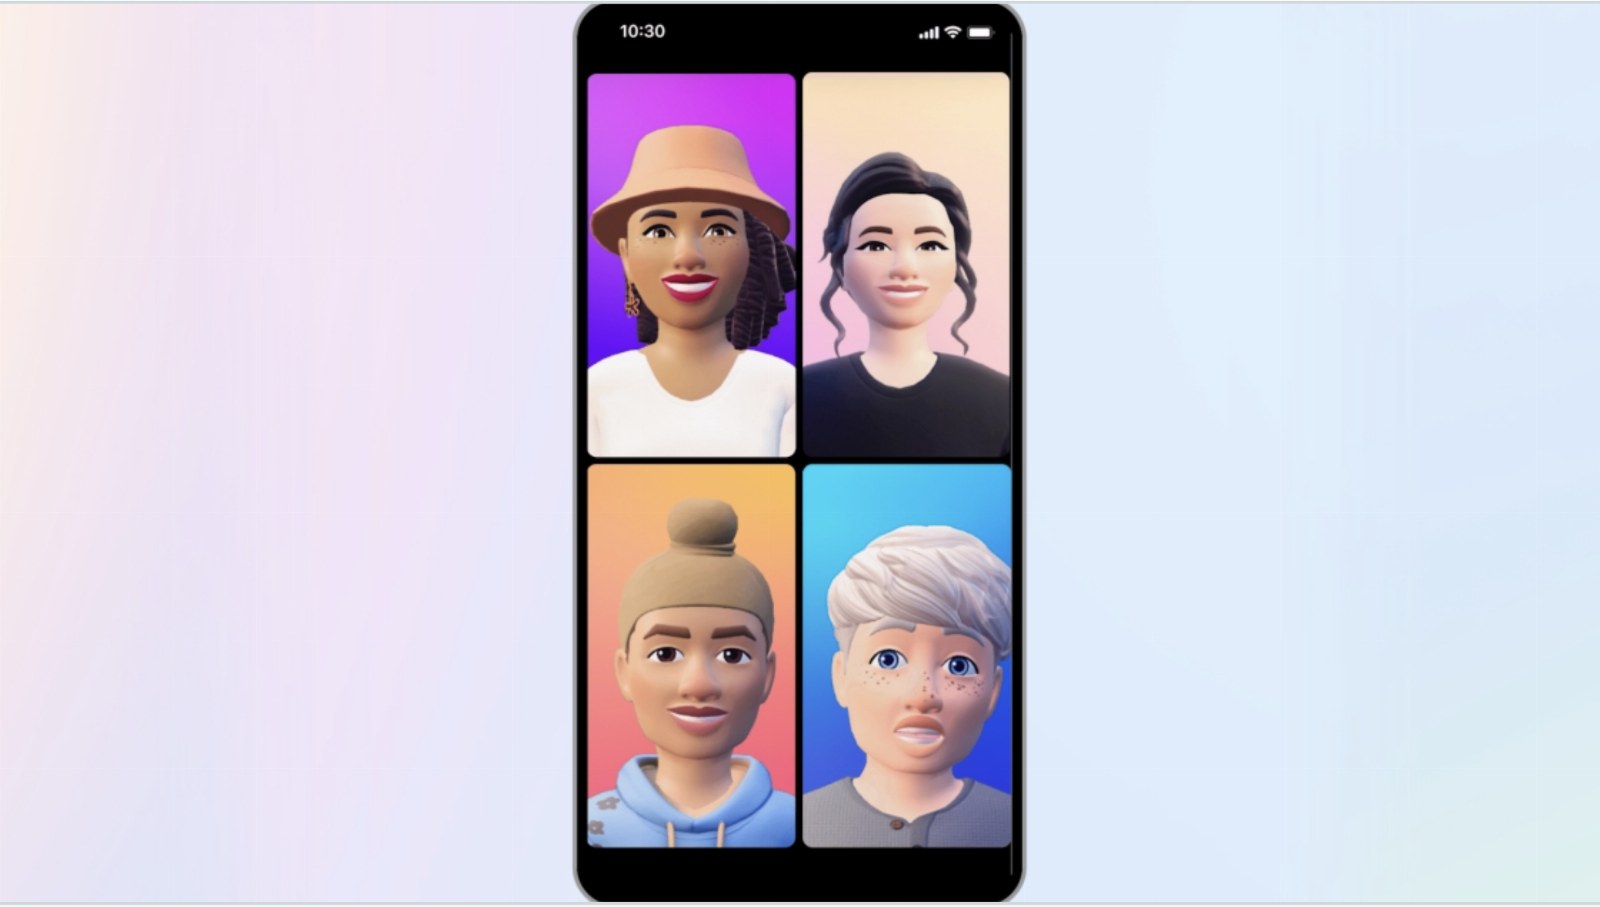 You can now use your Meta avatar in video calls on Instagram and Messenger